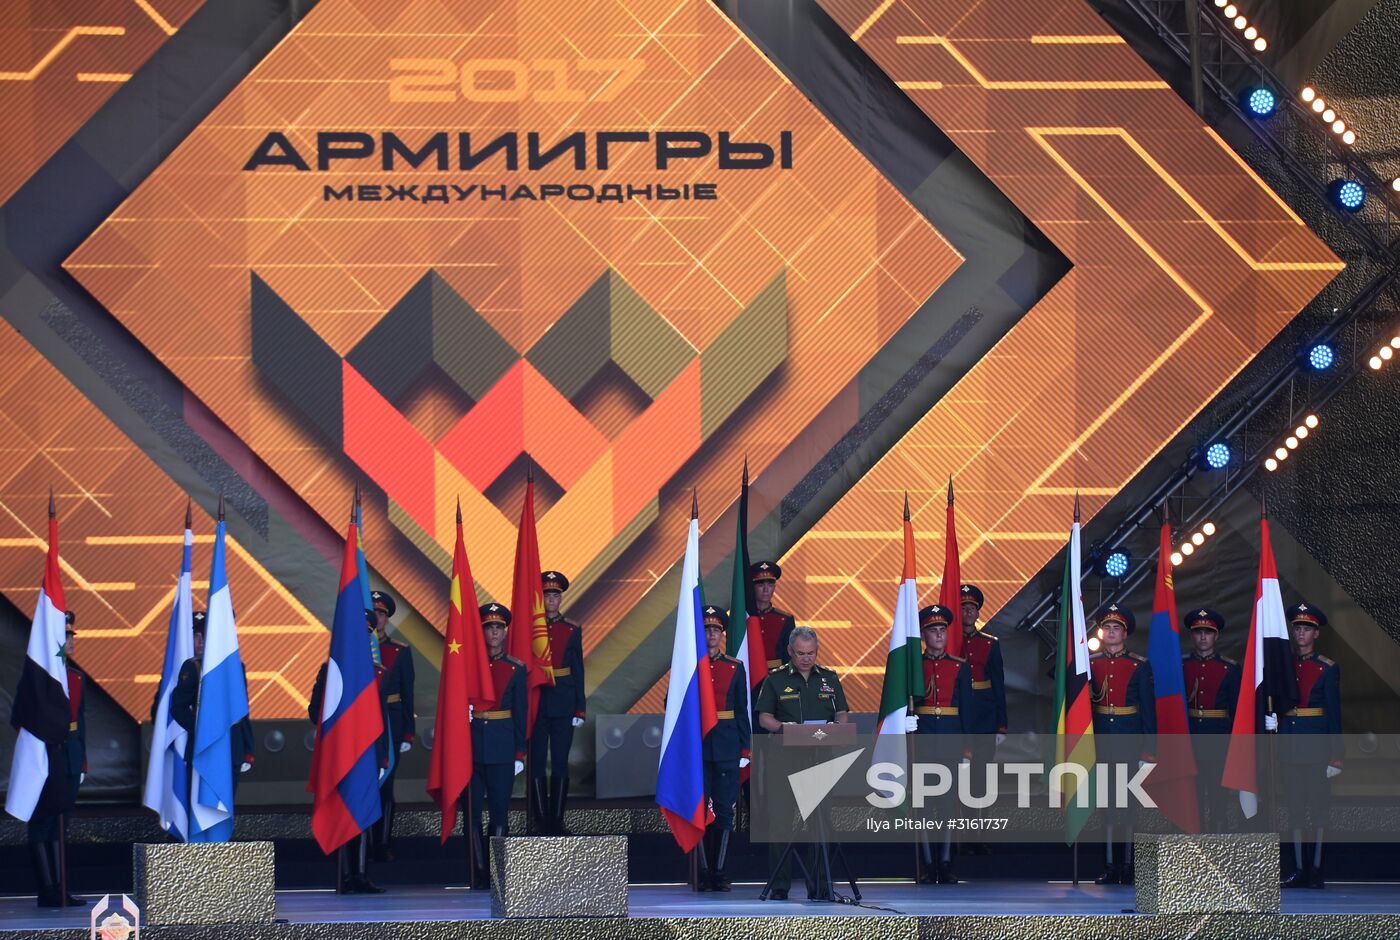 Opening ceremony for International Army Games 2017